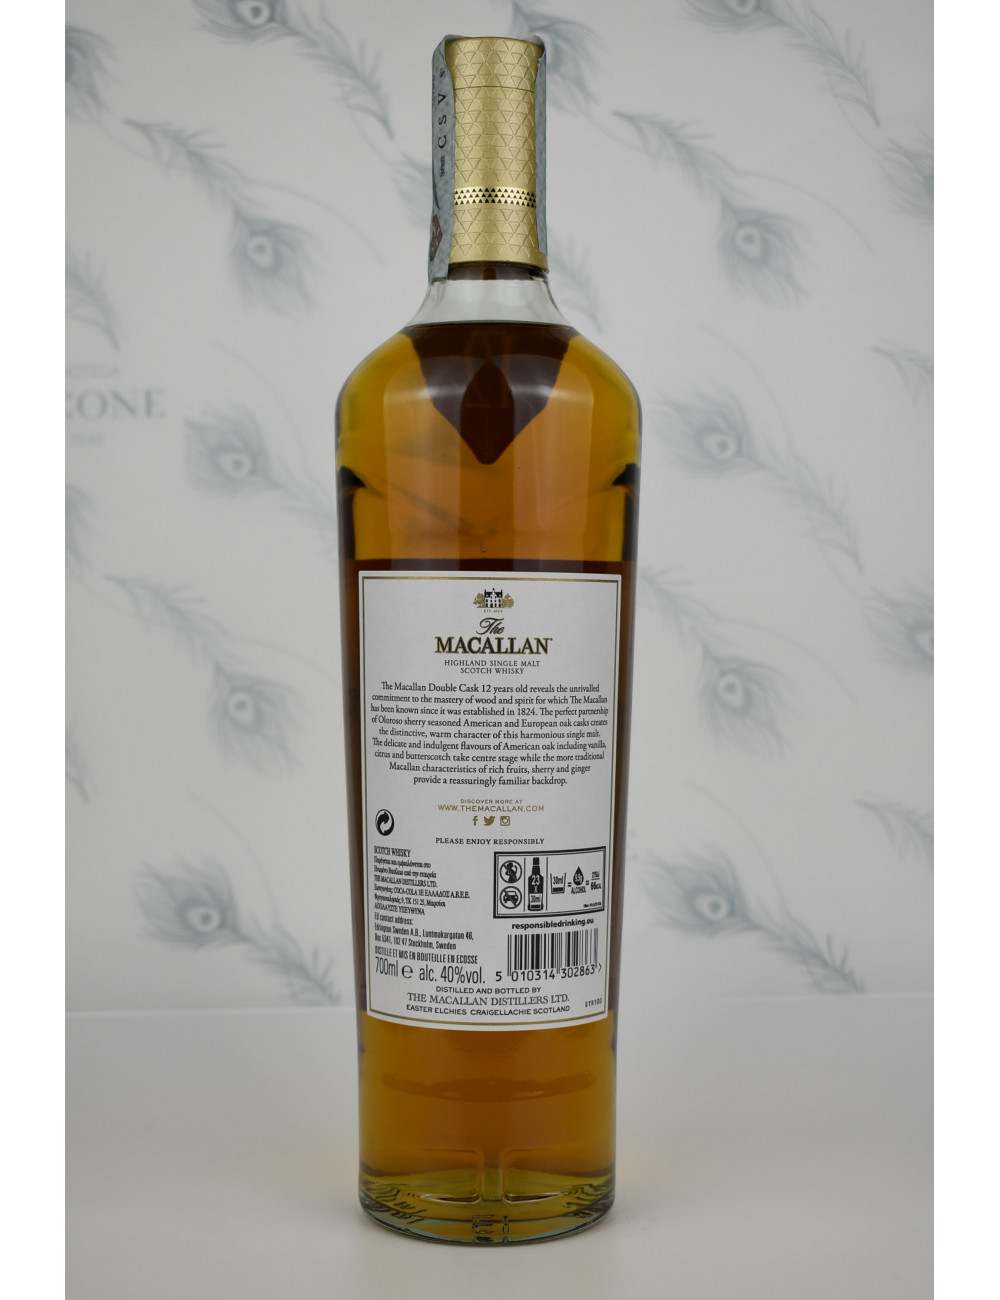 WHISKY THE MACALLAN 12Y DOUBLE CASK